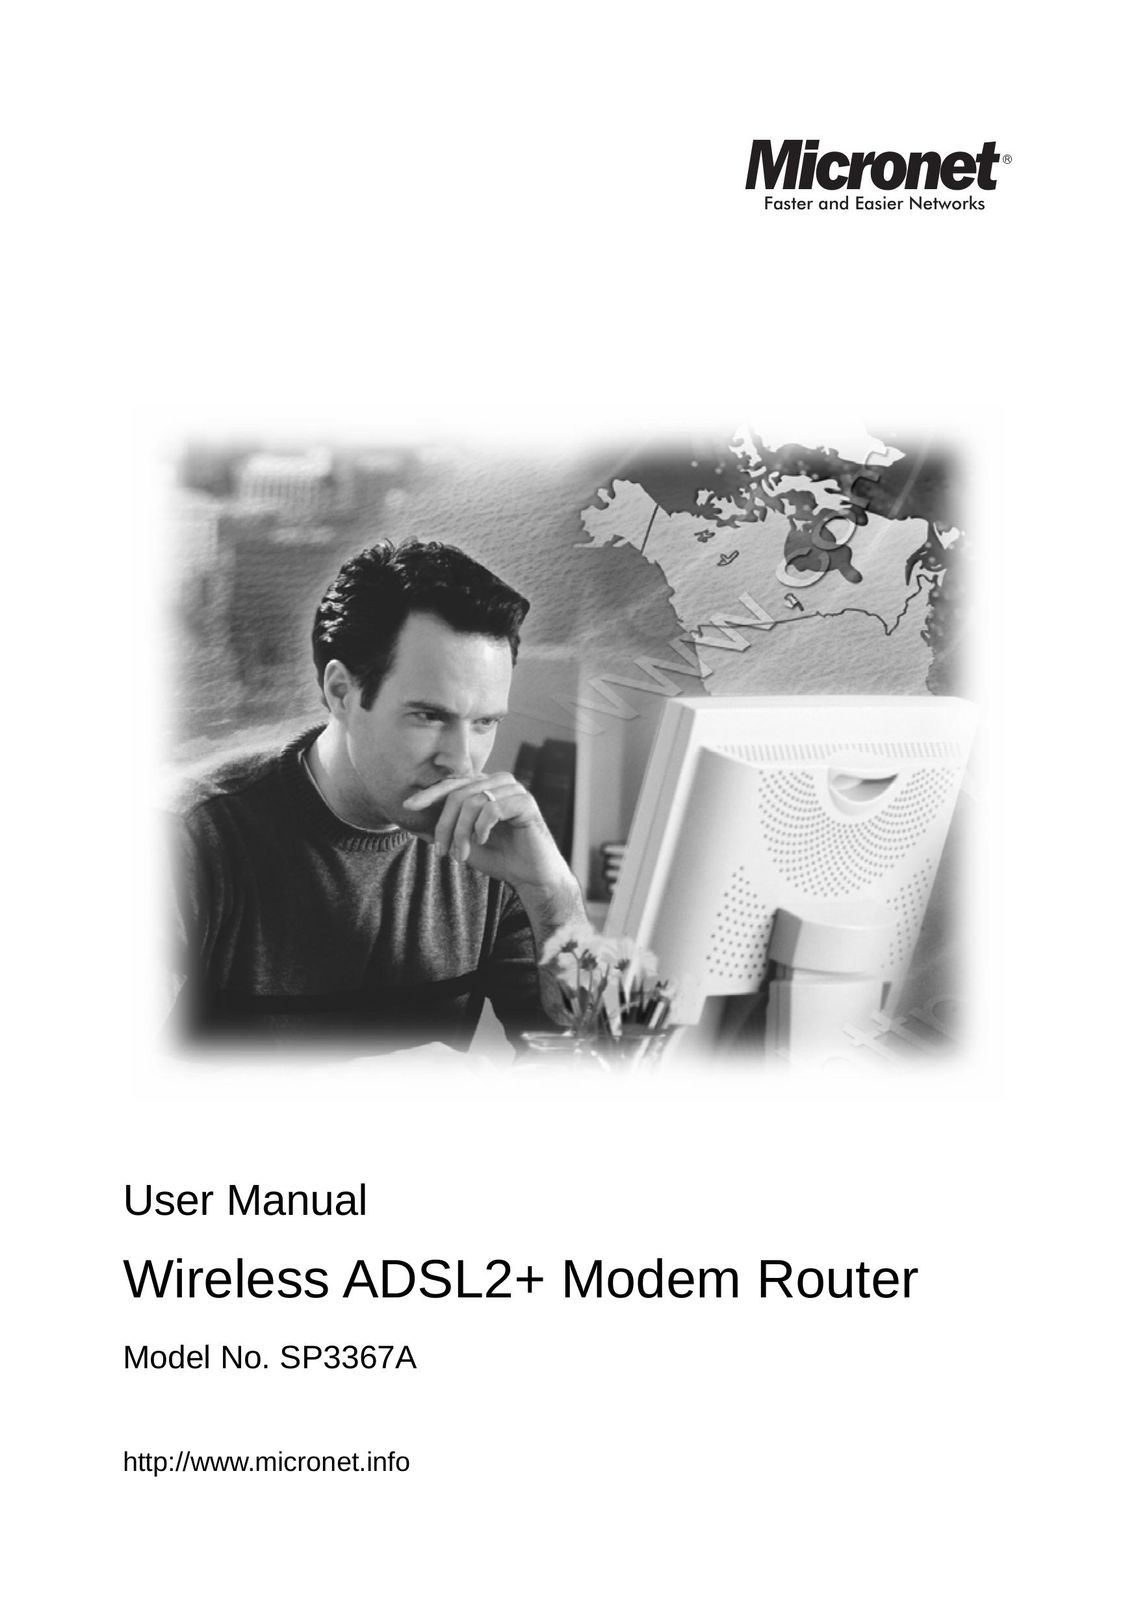 MicroNet Technology SP3367A Network Router User Manual